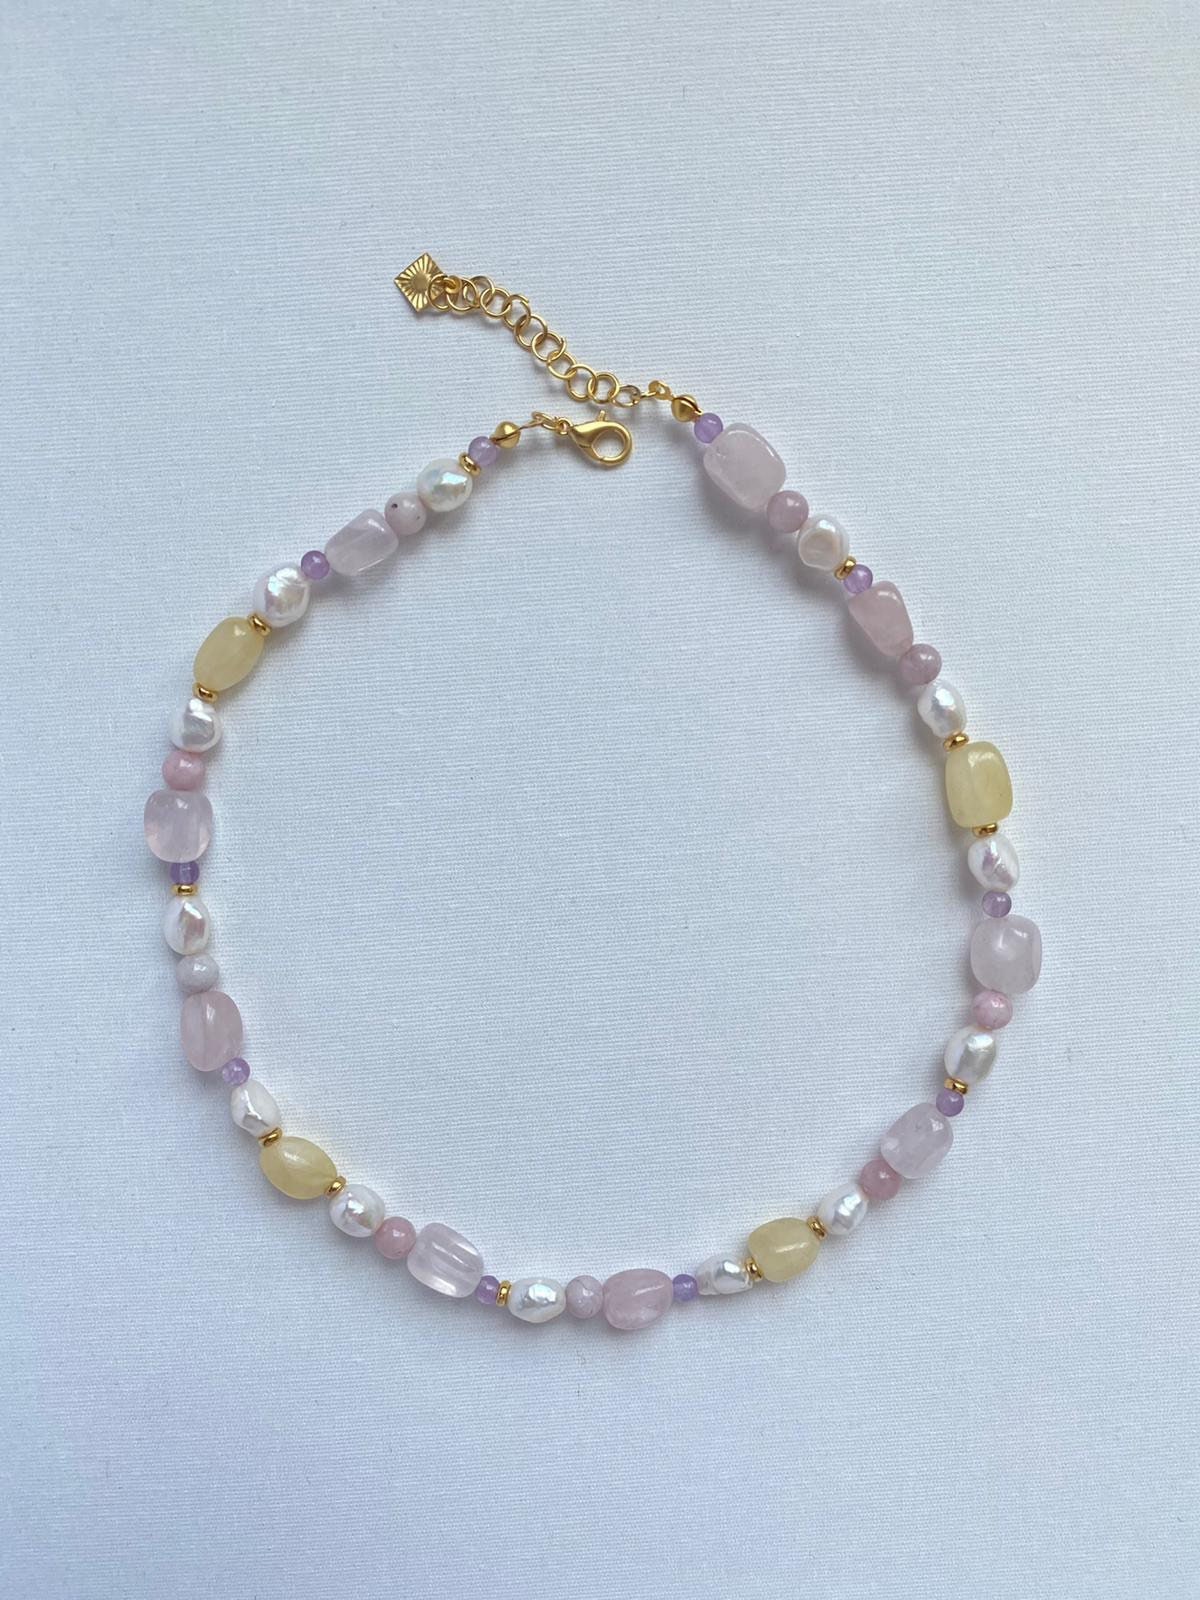 Gemstone Necklace Freshwater Pearl Necklace Jewelry Yellow - Etsy